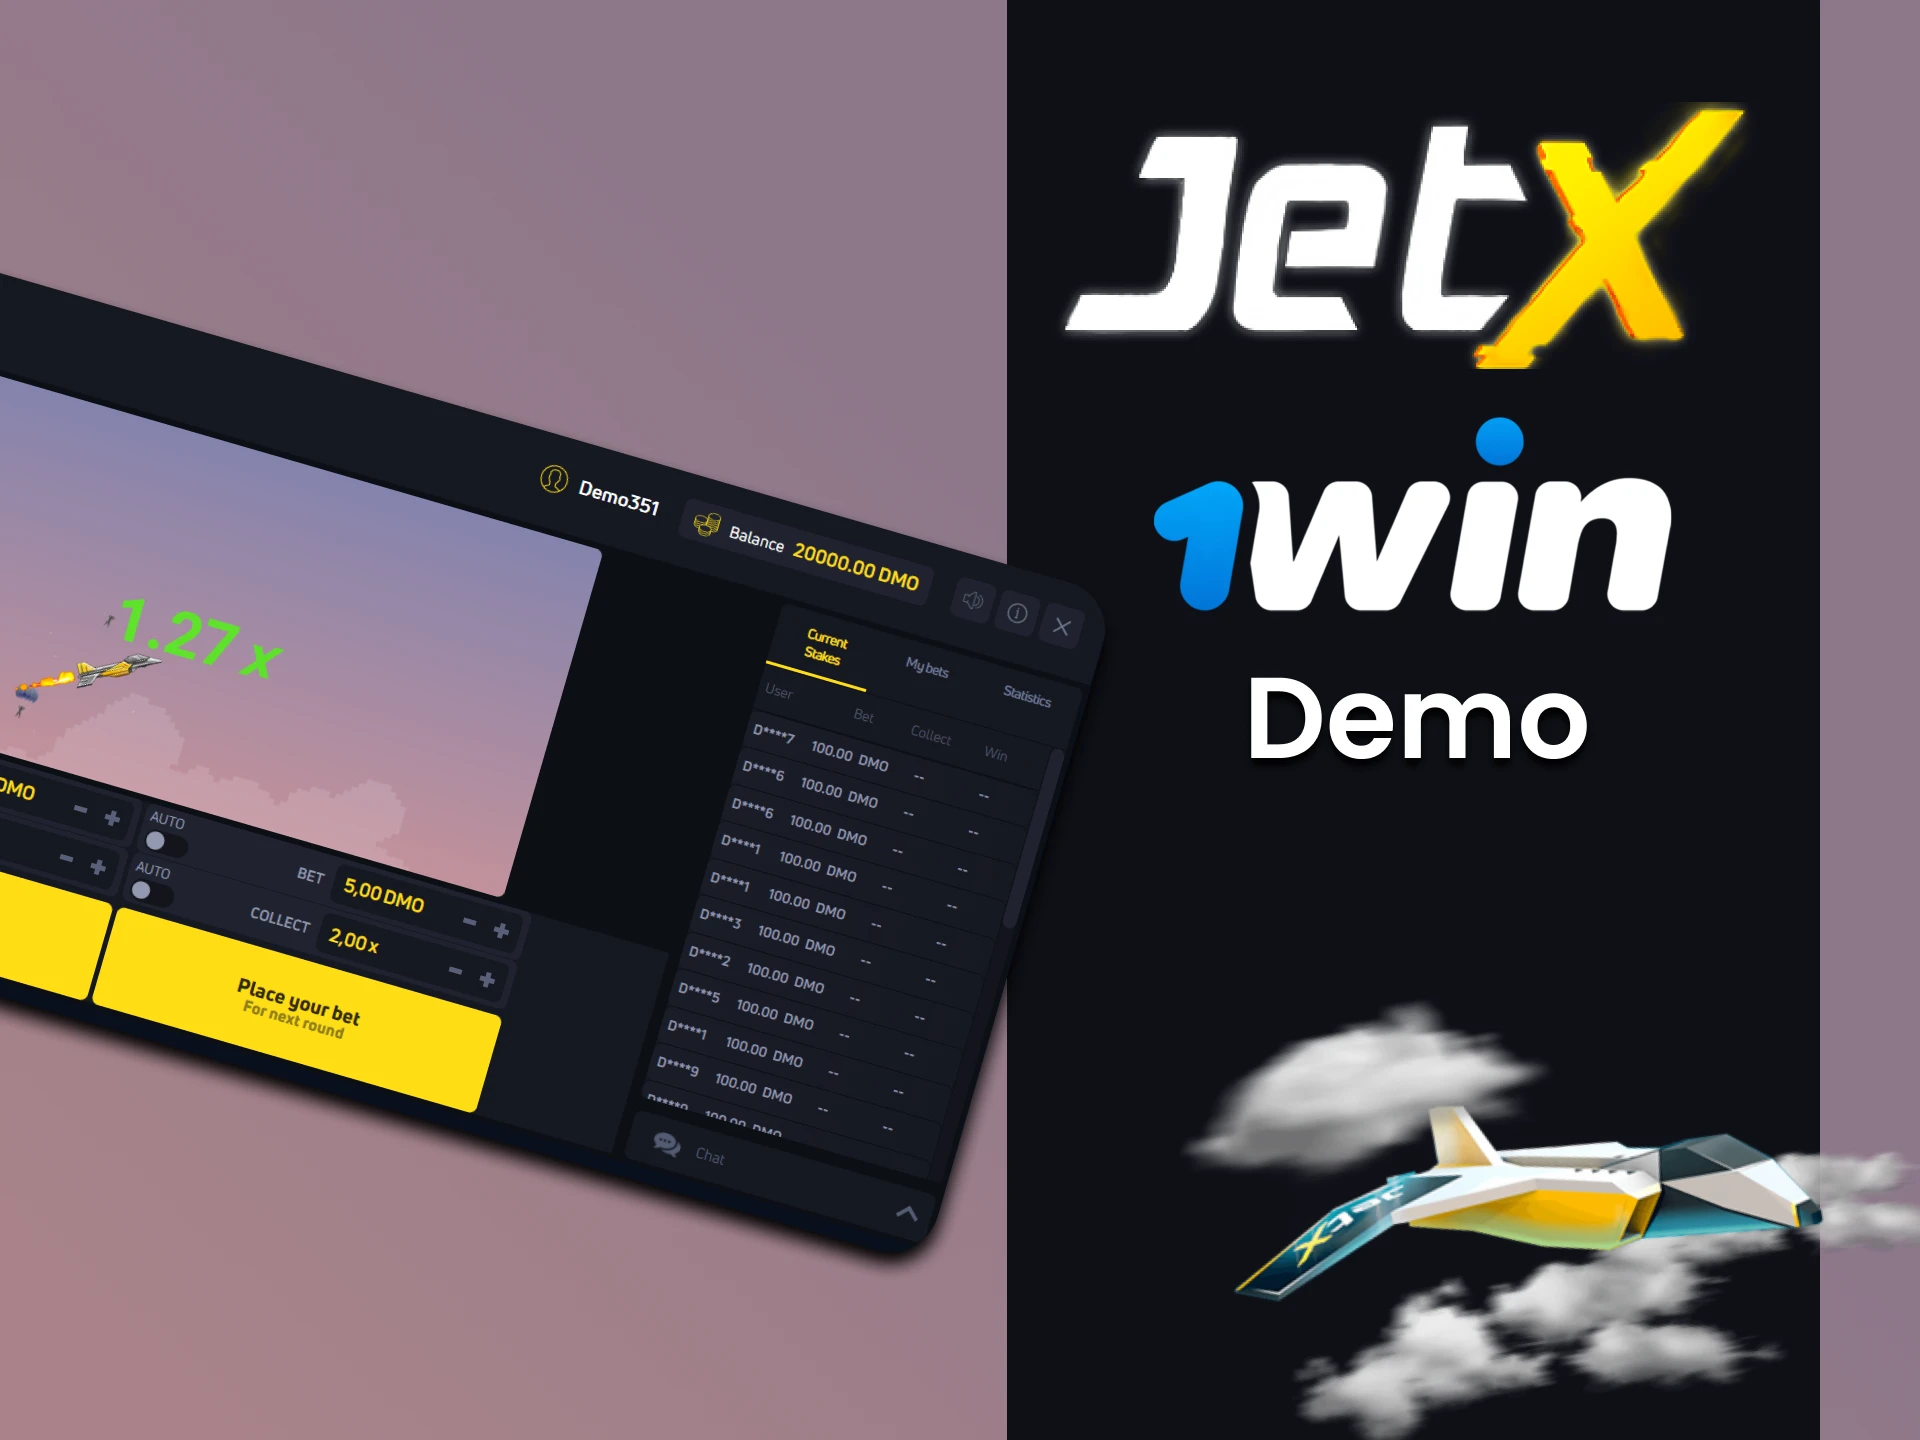 You can practice with the demo version of JetX on 1win.